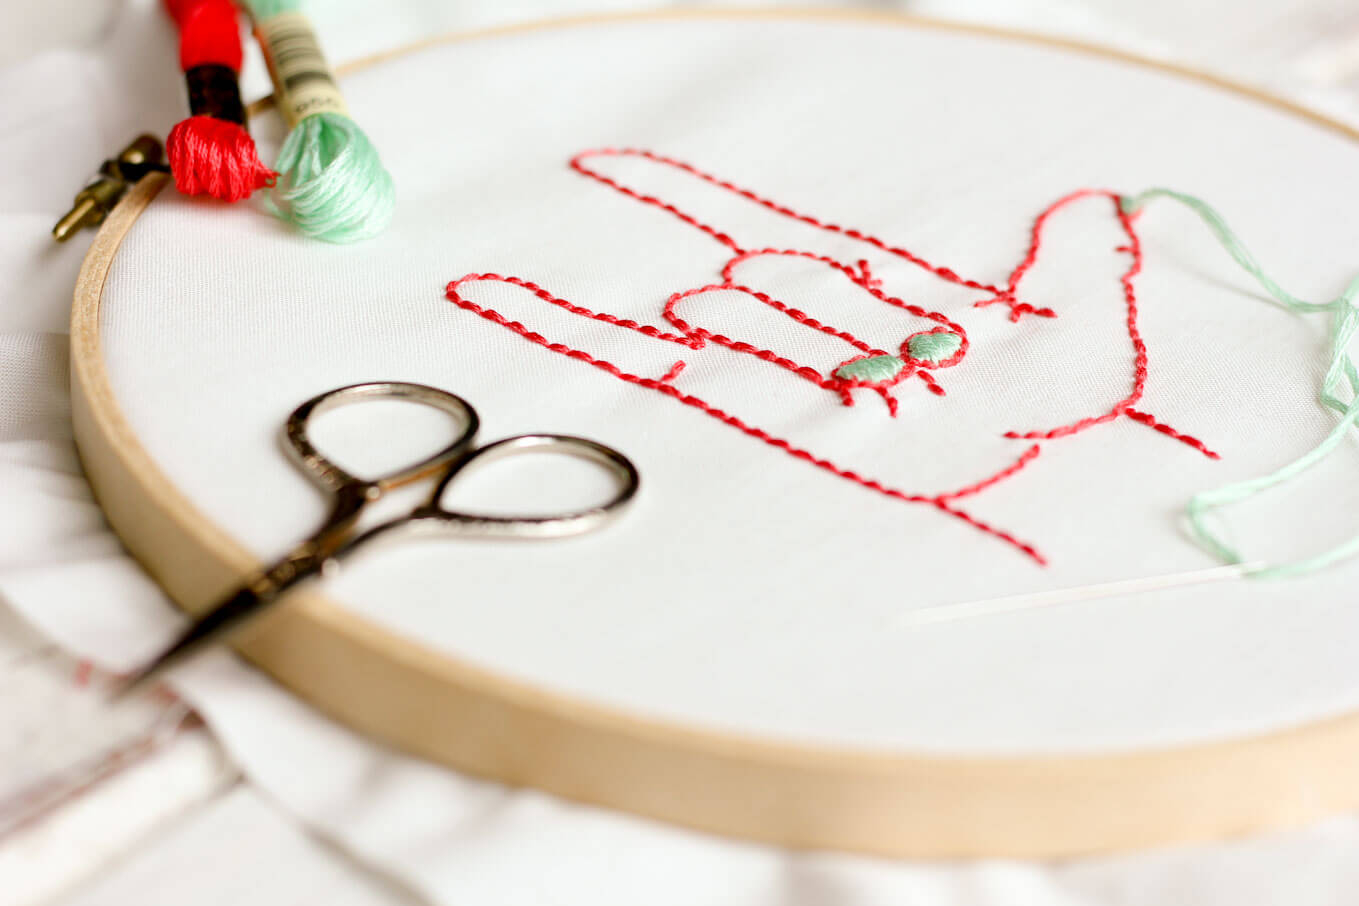 Free Paper Embroidery Patterns And Instructions I Love You Free Embroidery Pattern Make Do Crew